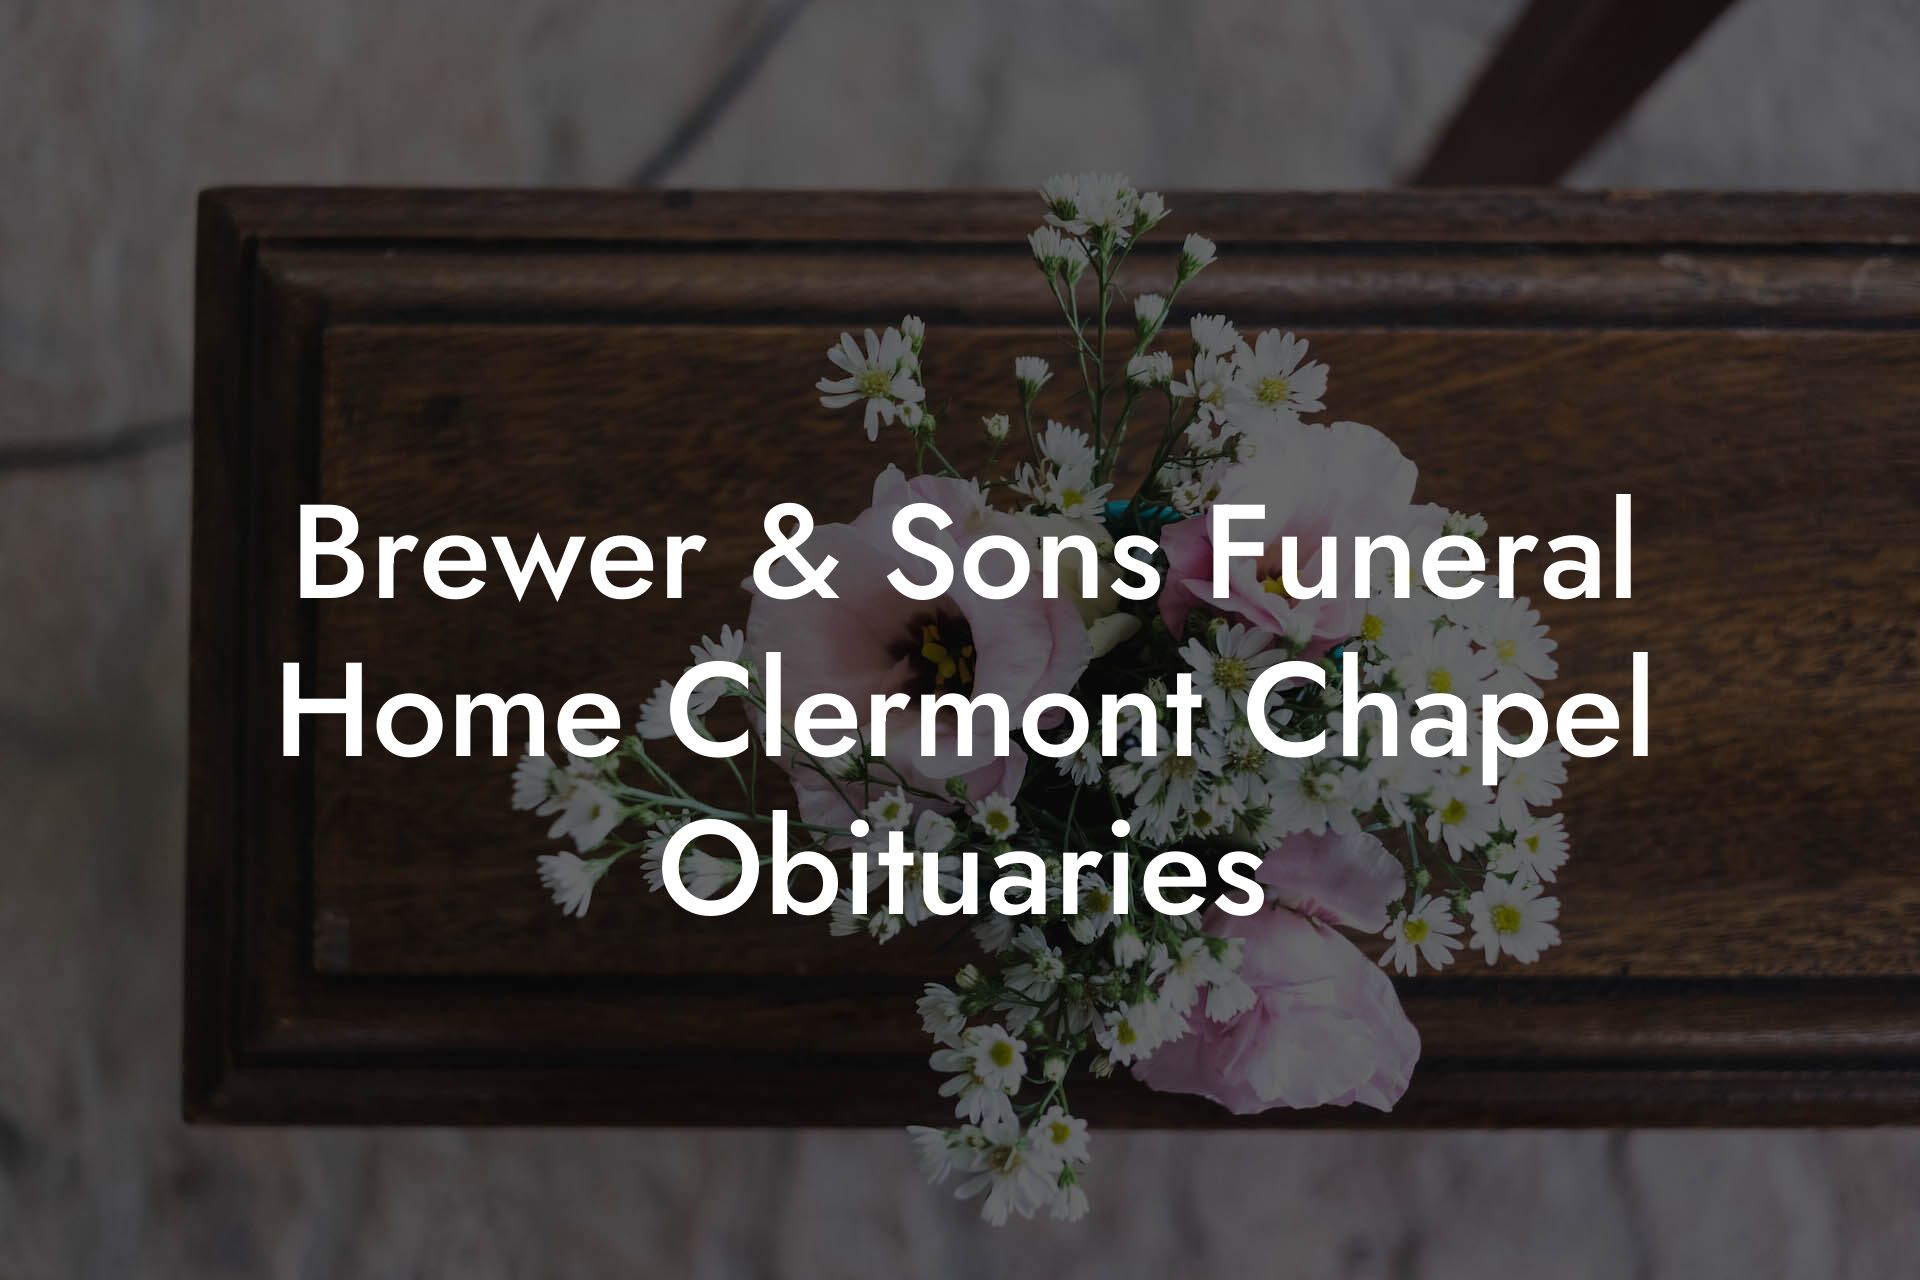 Brewer & Sons Funeral Home Clermont Chapel Obituaries